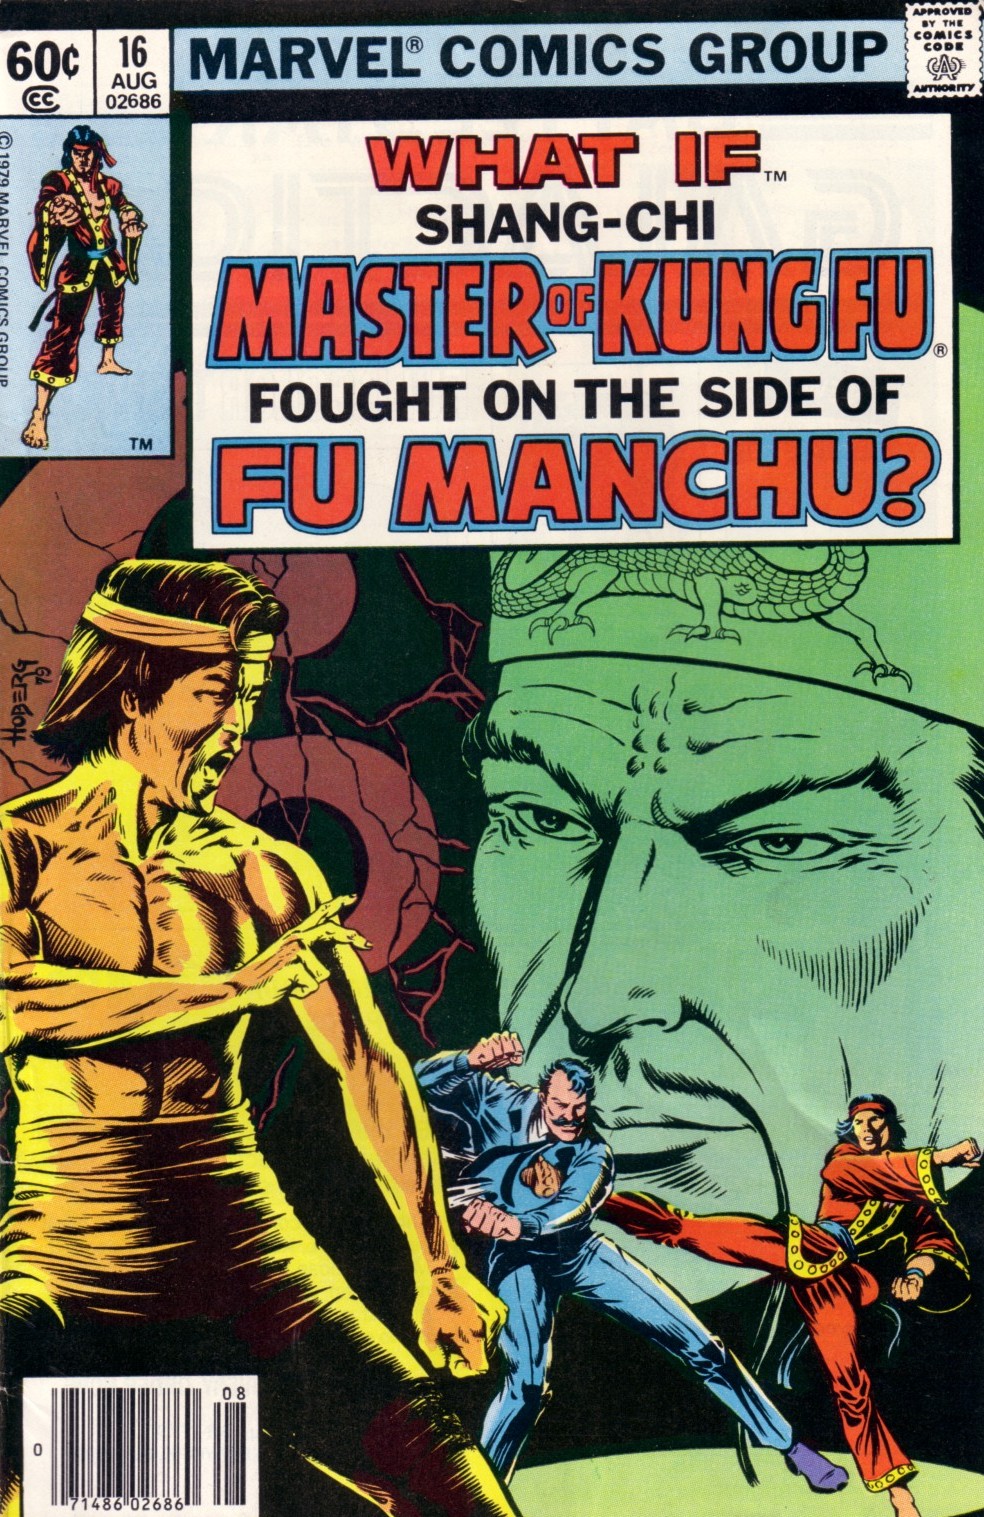 What If? (1977) issue 16 - Shang Chi Master of Kung Fu fought on The side of Fu Manchu - Page 1